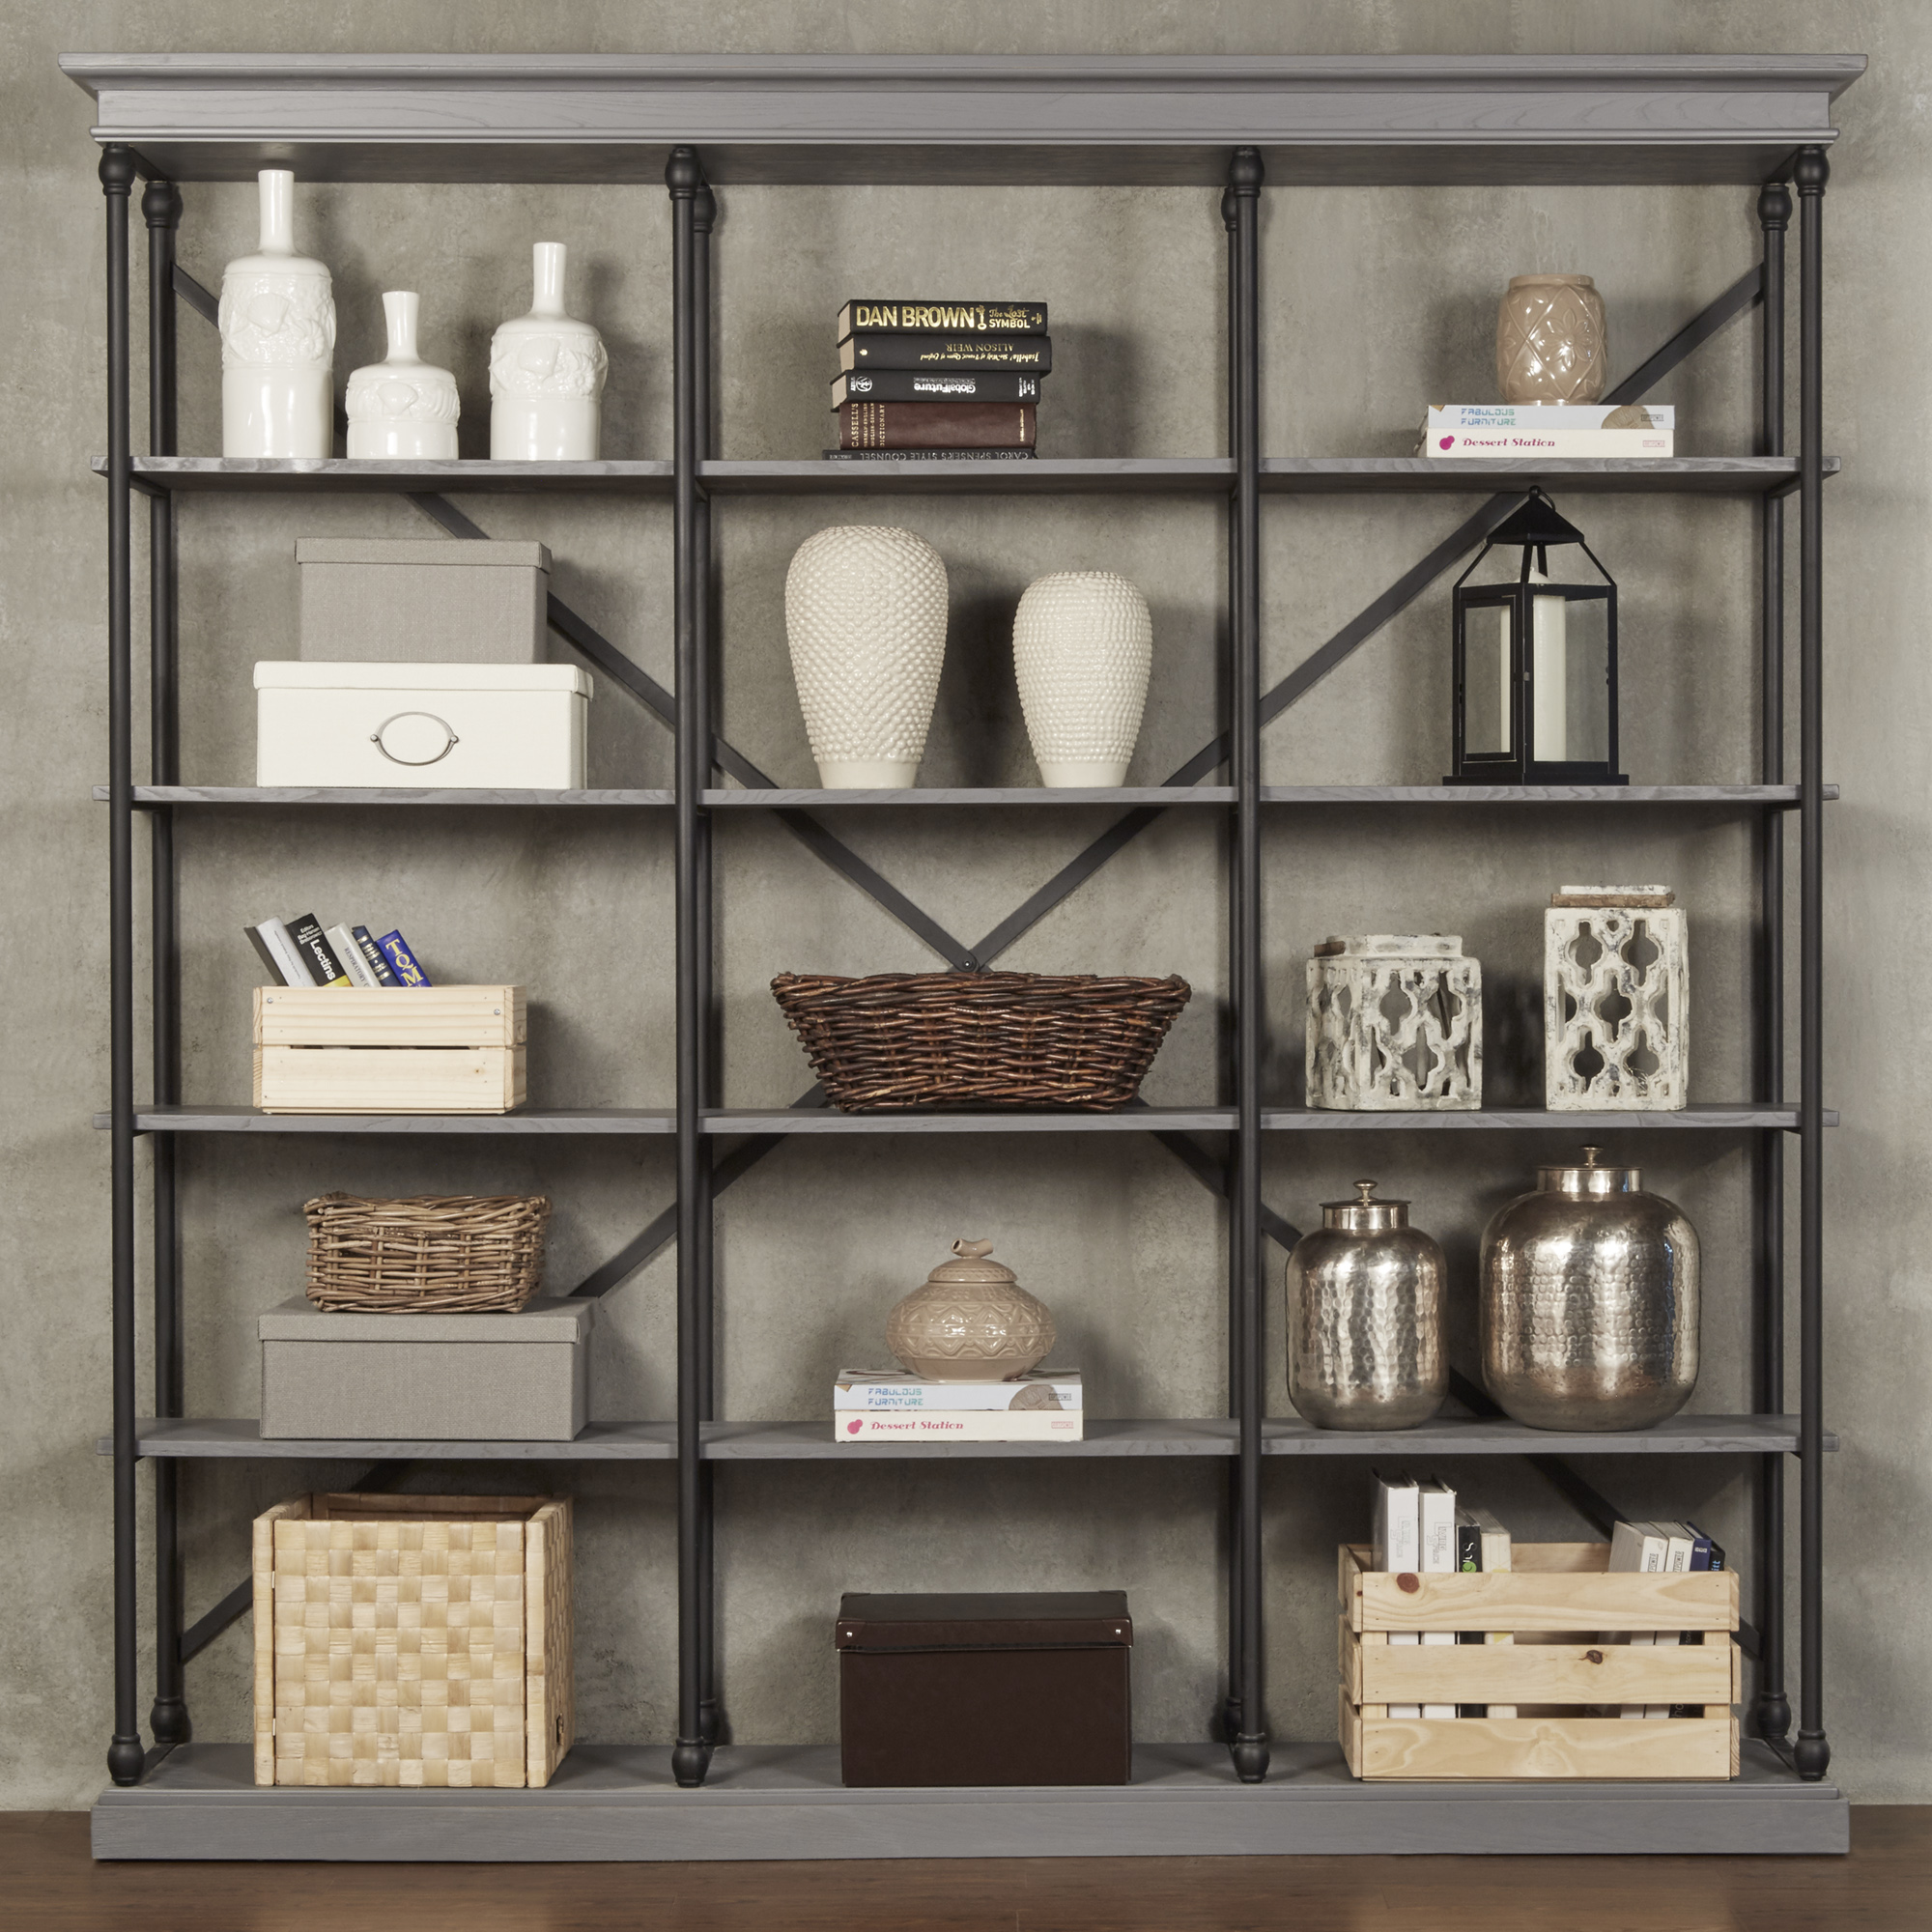 This is the iNSPIRE Q Cornice Triple Shelving Bookcase in a grey finish. The shelves are decorated with a multitude of décor of various shades of white, grey, brown, and black. Boxes and baskets provide storage opportunities without creating clutter. 